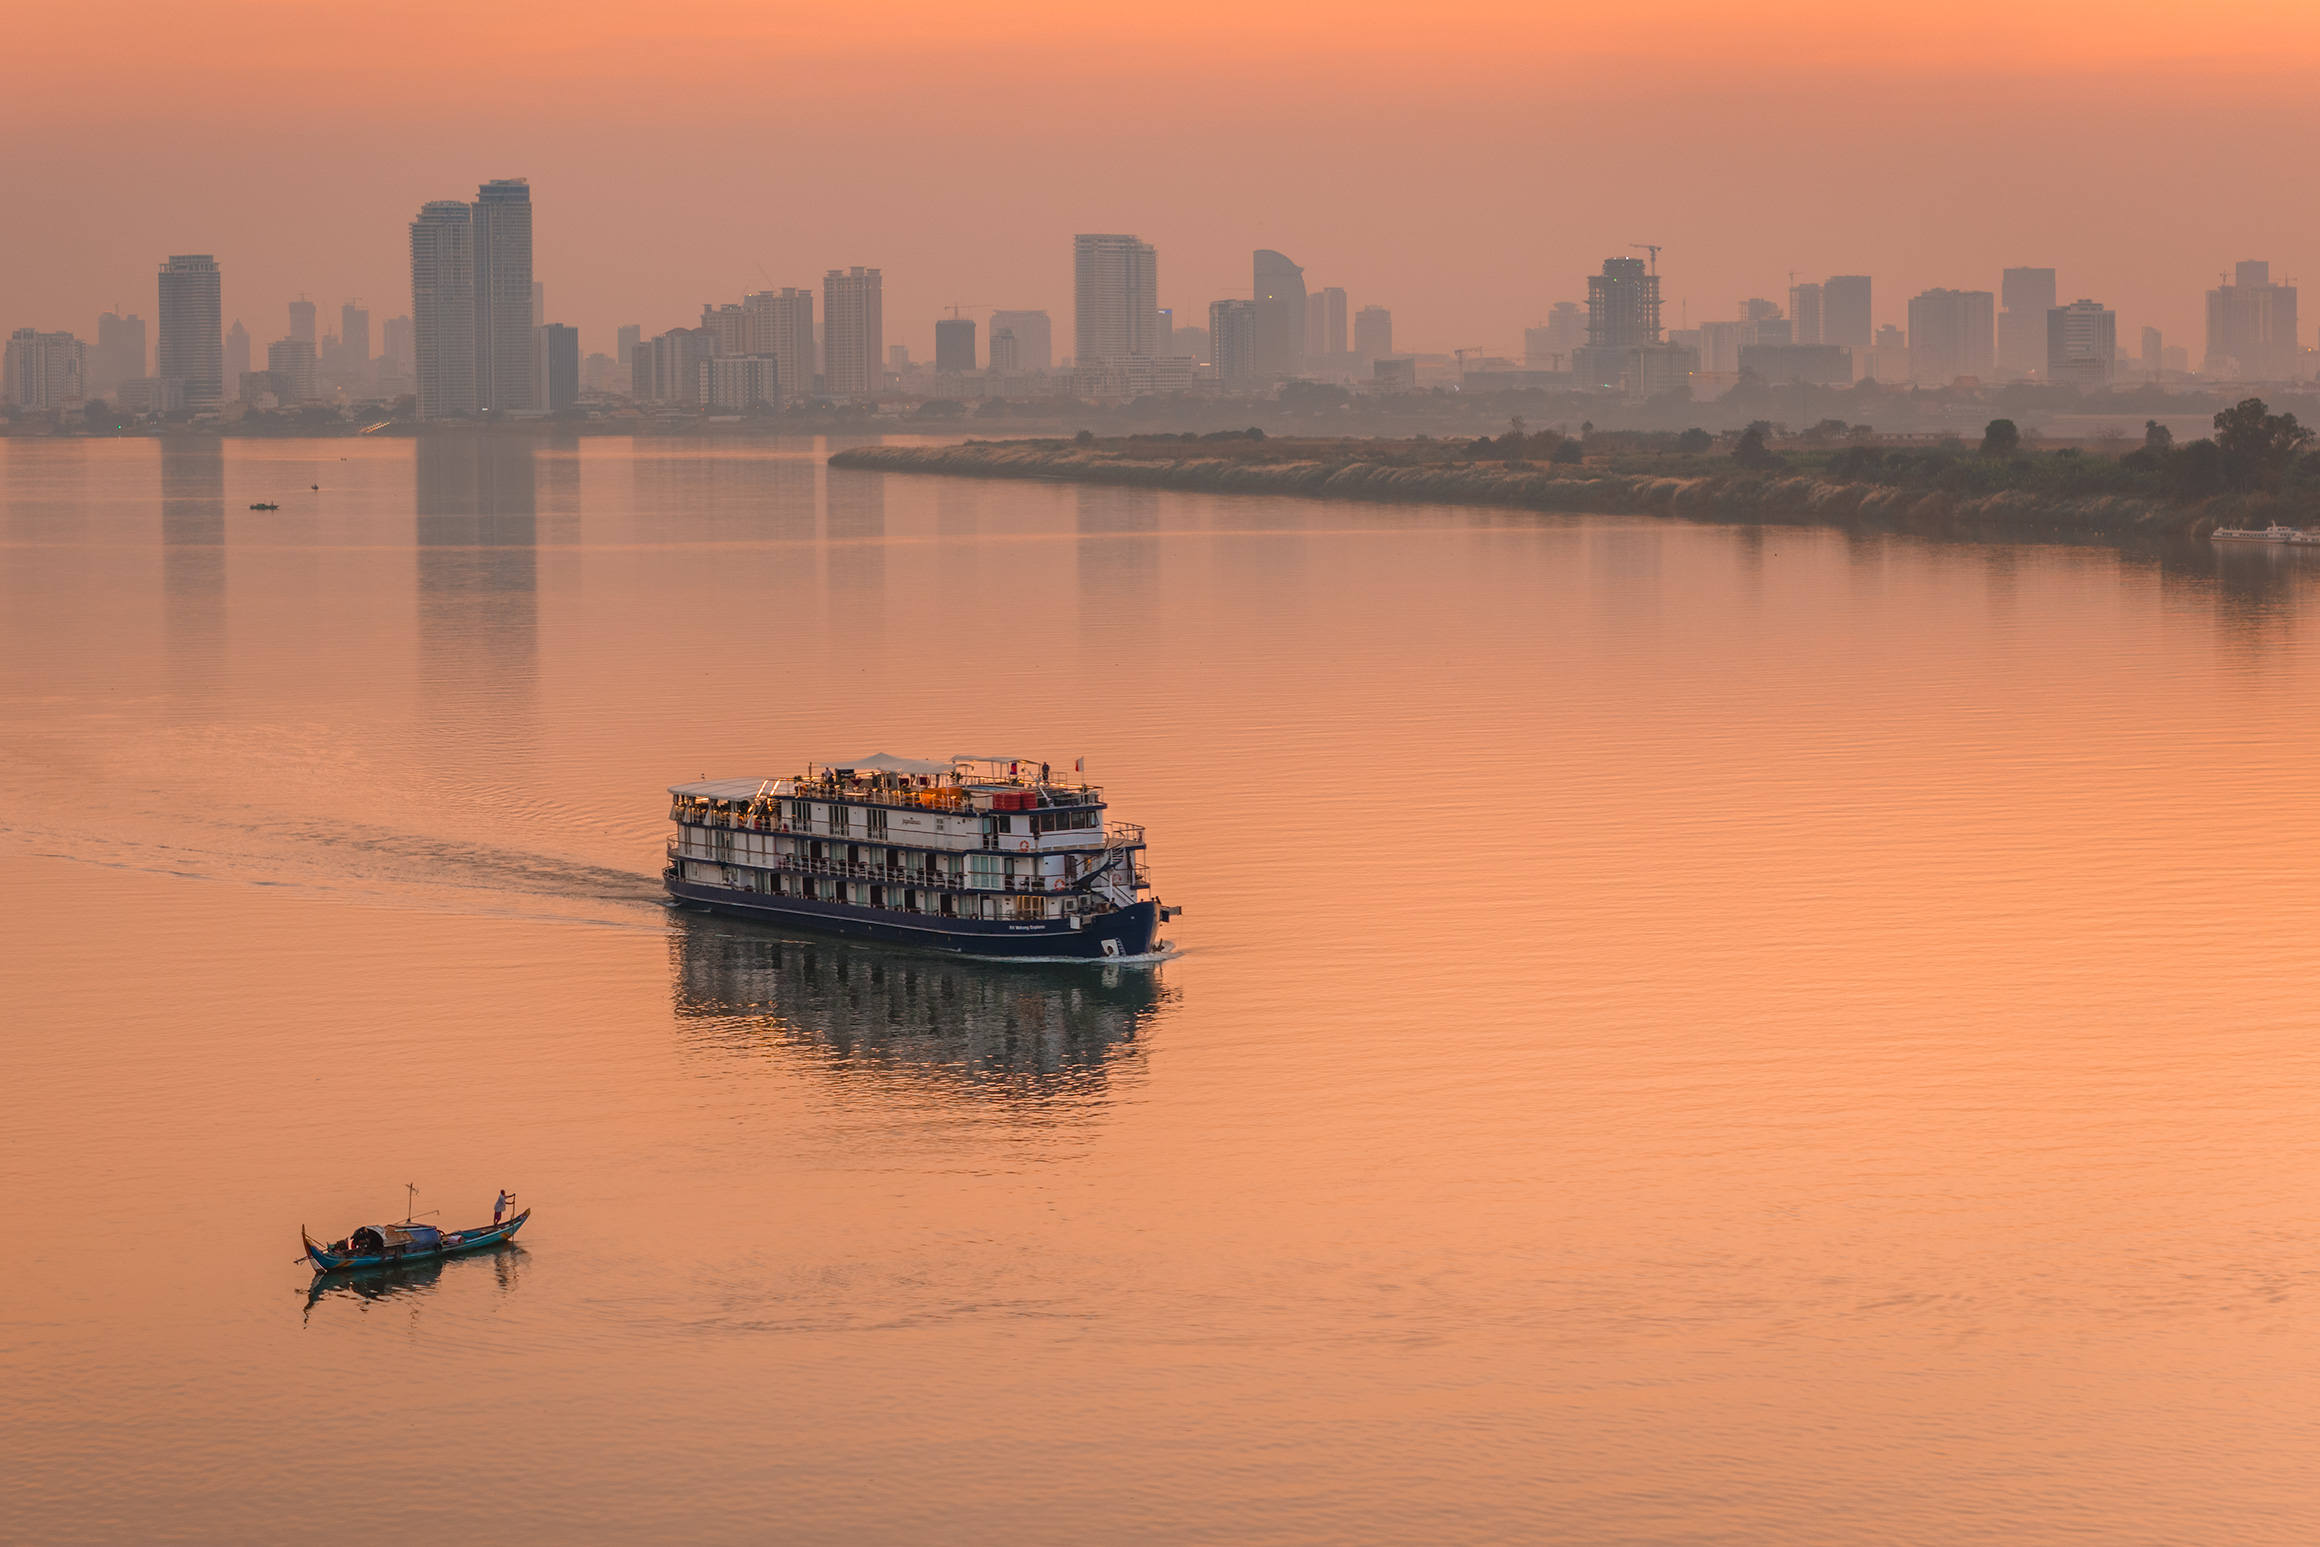 Phnom Penh skyline and cruise boat on the Tonle Sap River | Professional aerial photographer in Cambodia